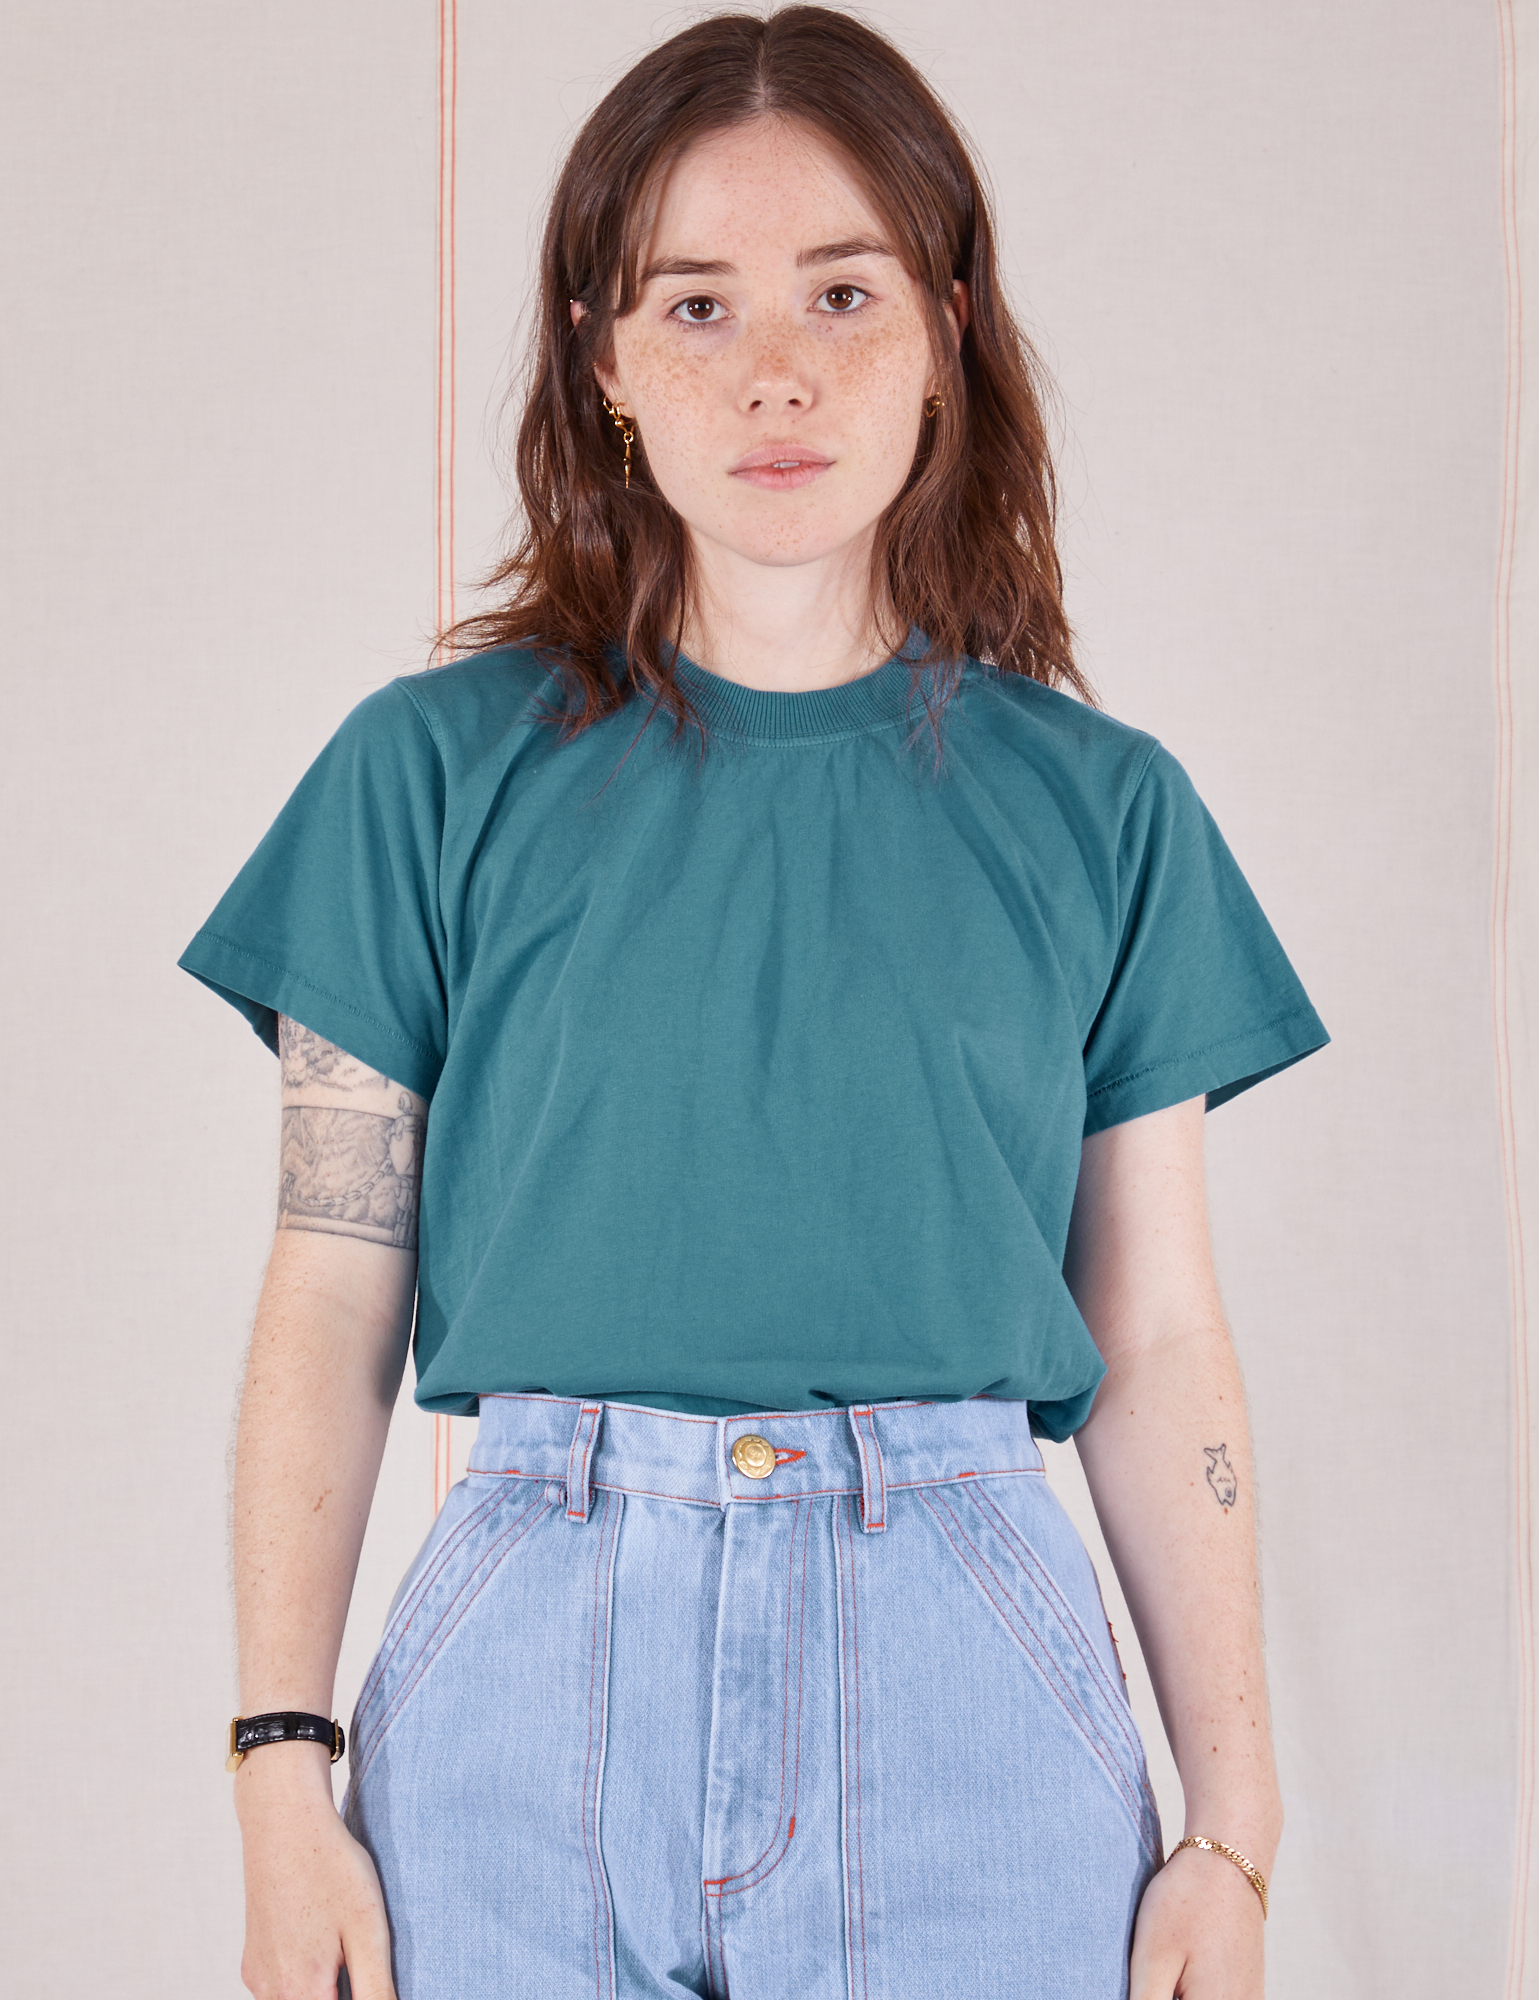 Hana is 5&#39;3&quot; and wearing P Organic Vintage Tee in Marine Blue tucked into light wash Carpenter Jeans